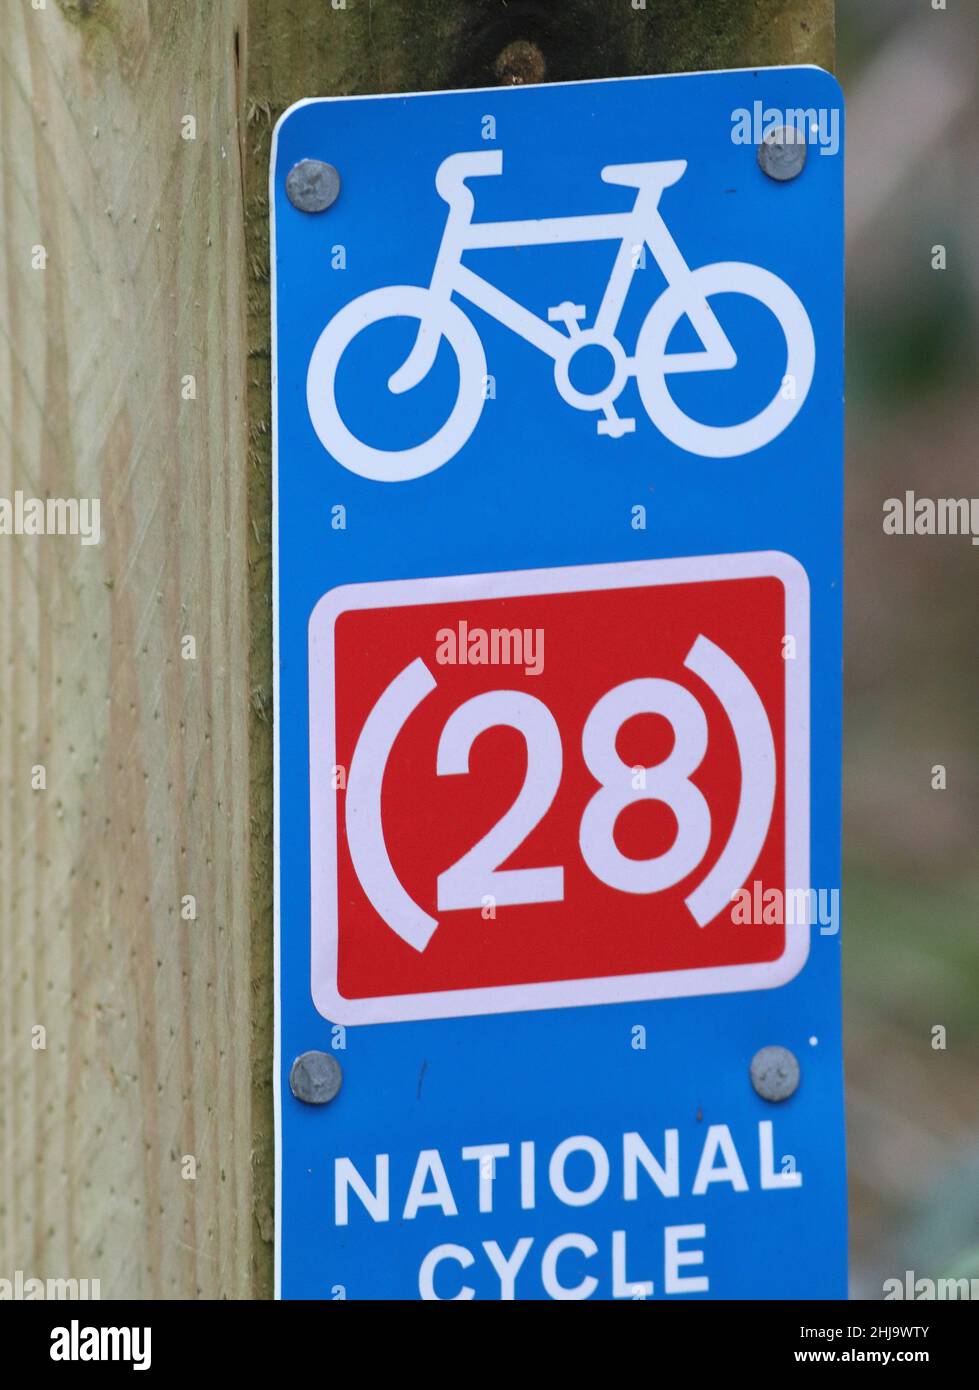 National Cycle Route 28 Blu Foto Stock